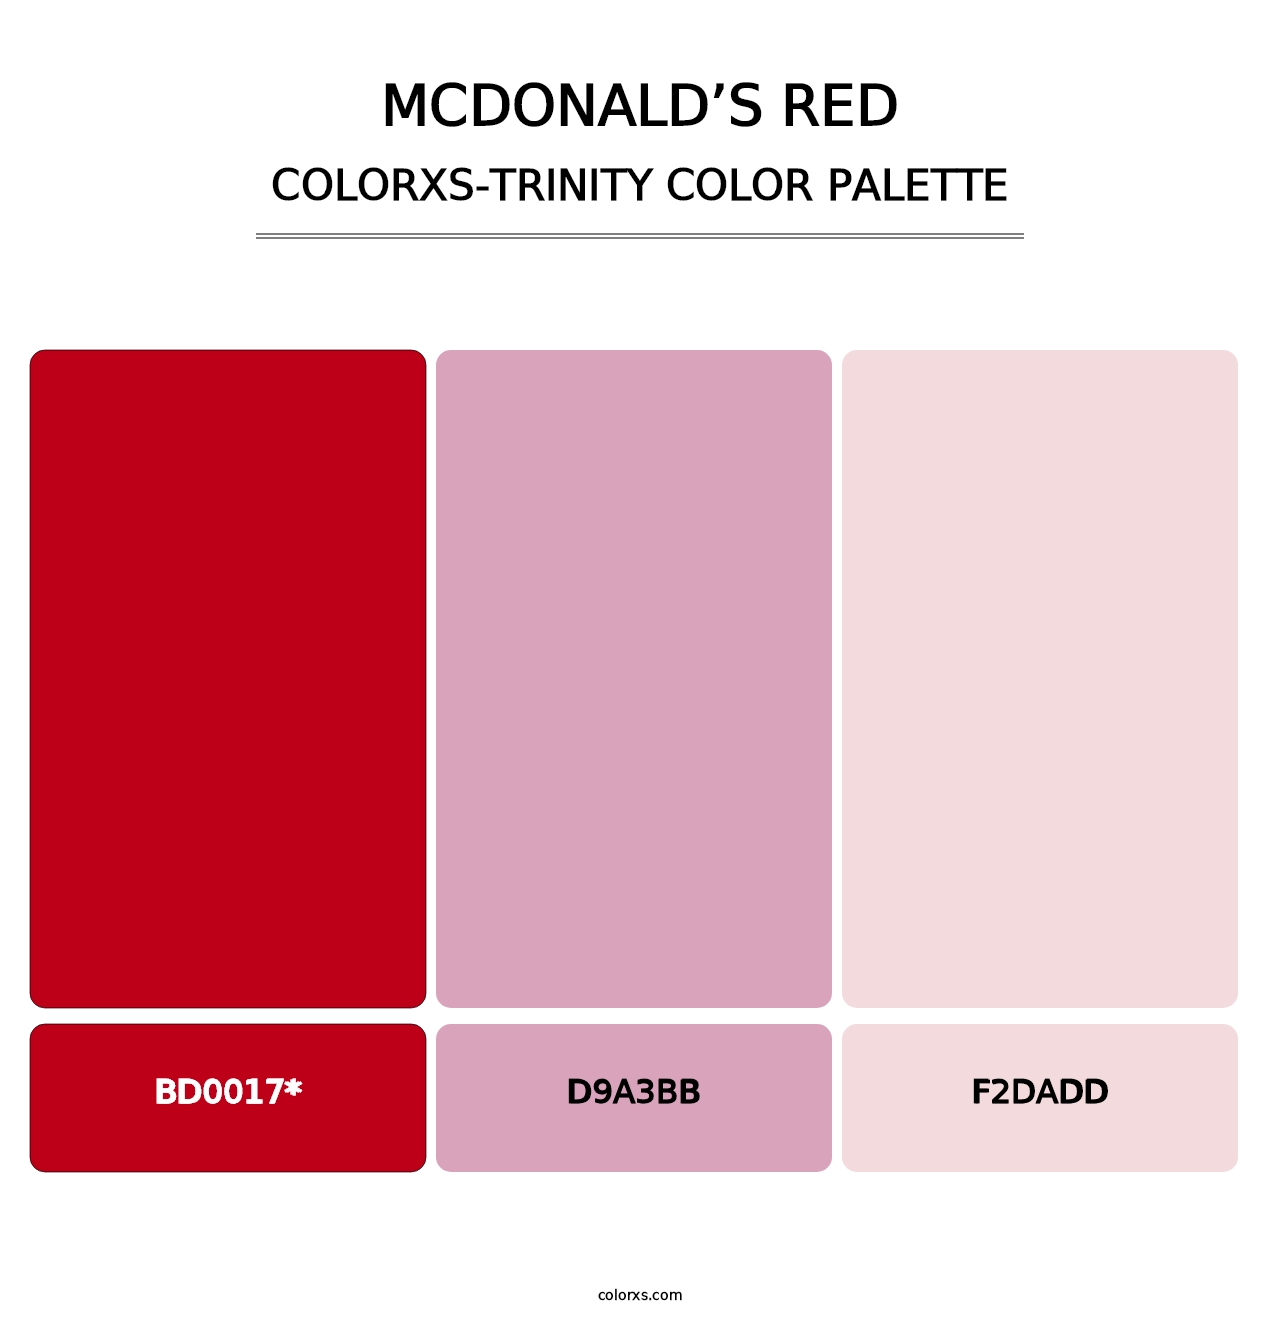 McDonald’s Red - Colorxs Trinity Palette